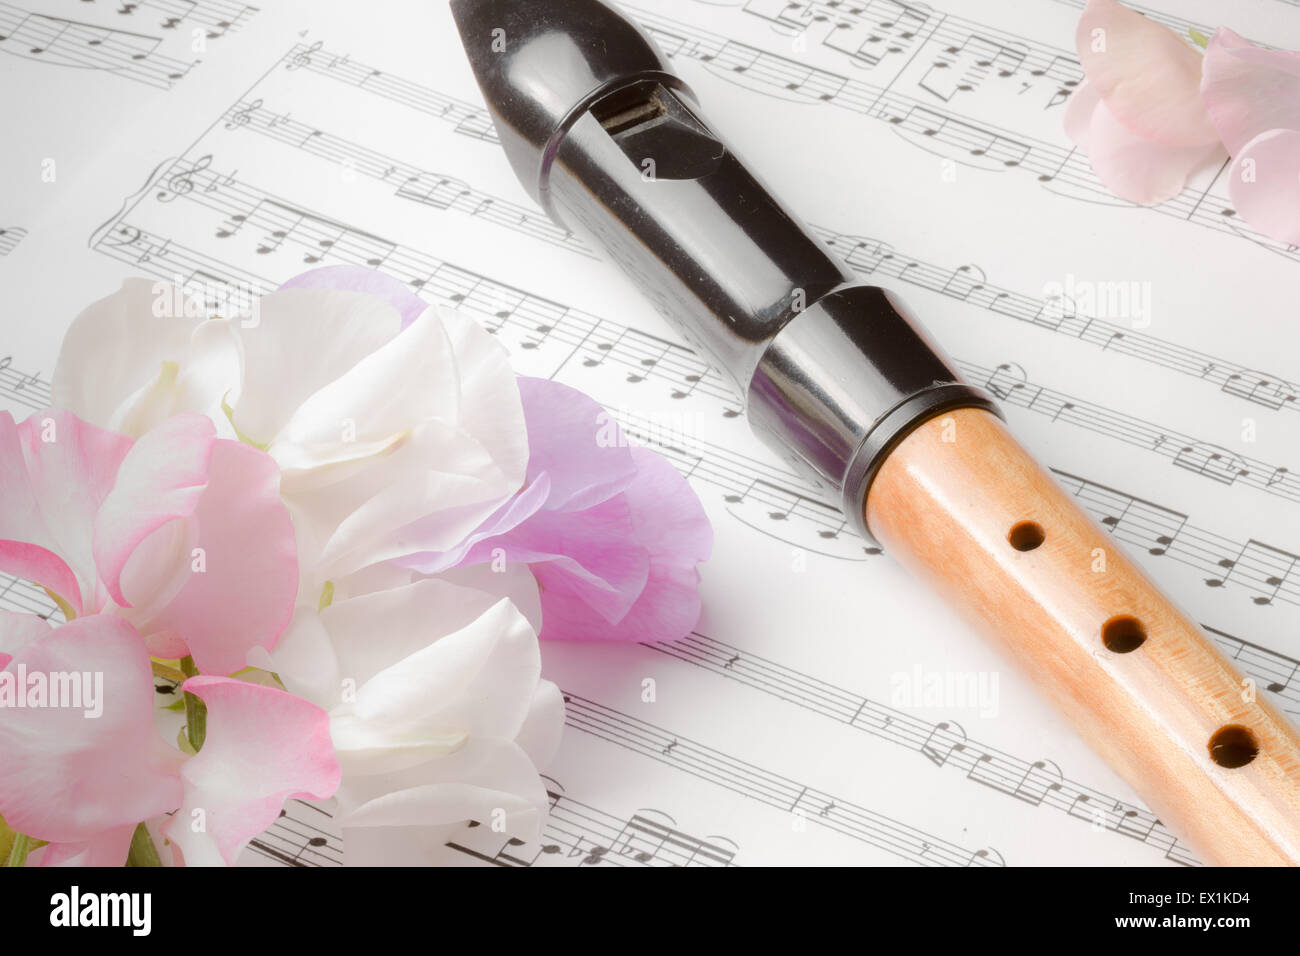 Still life image of a vintage descant recorder placed on sheet music along with sweet pea flowers Stock Photo